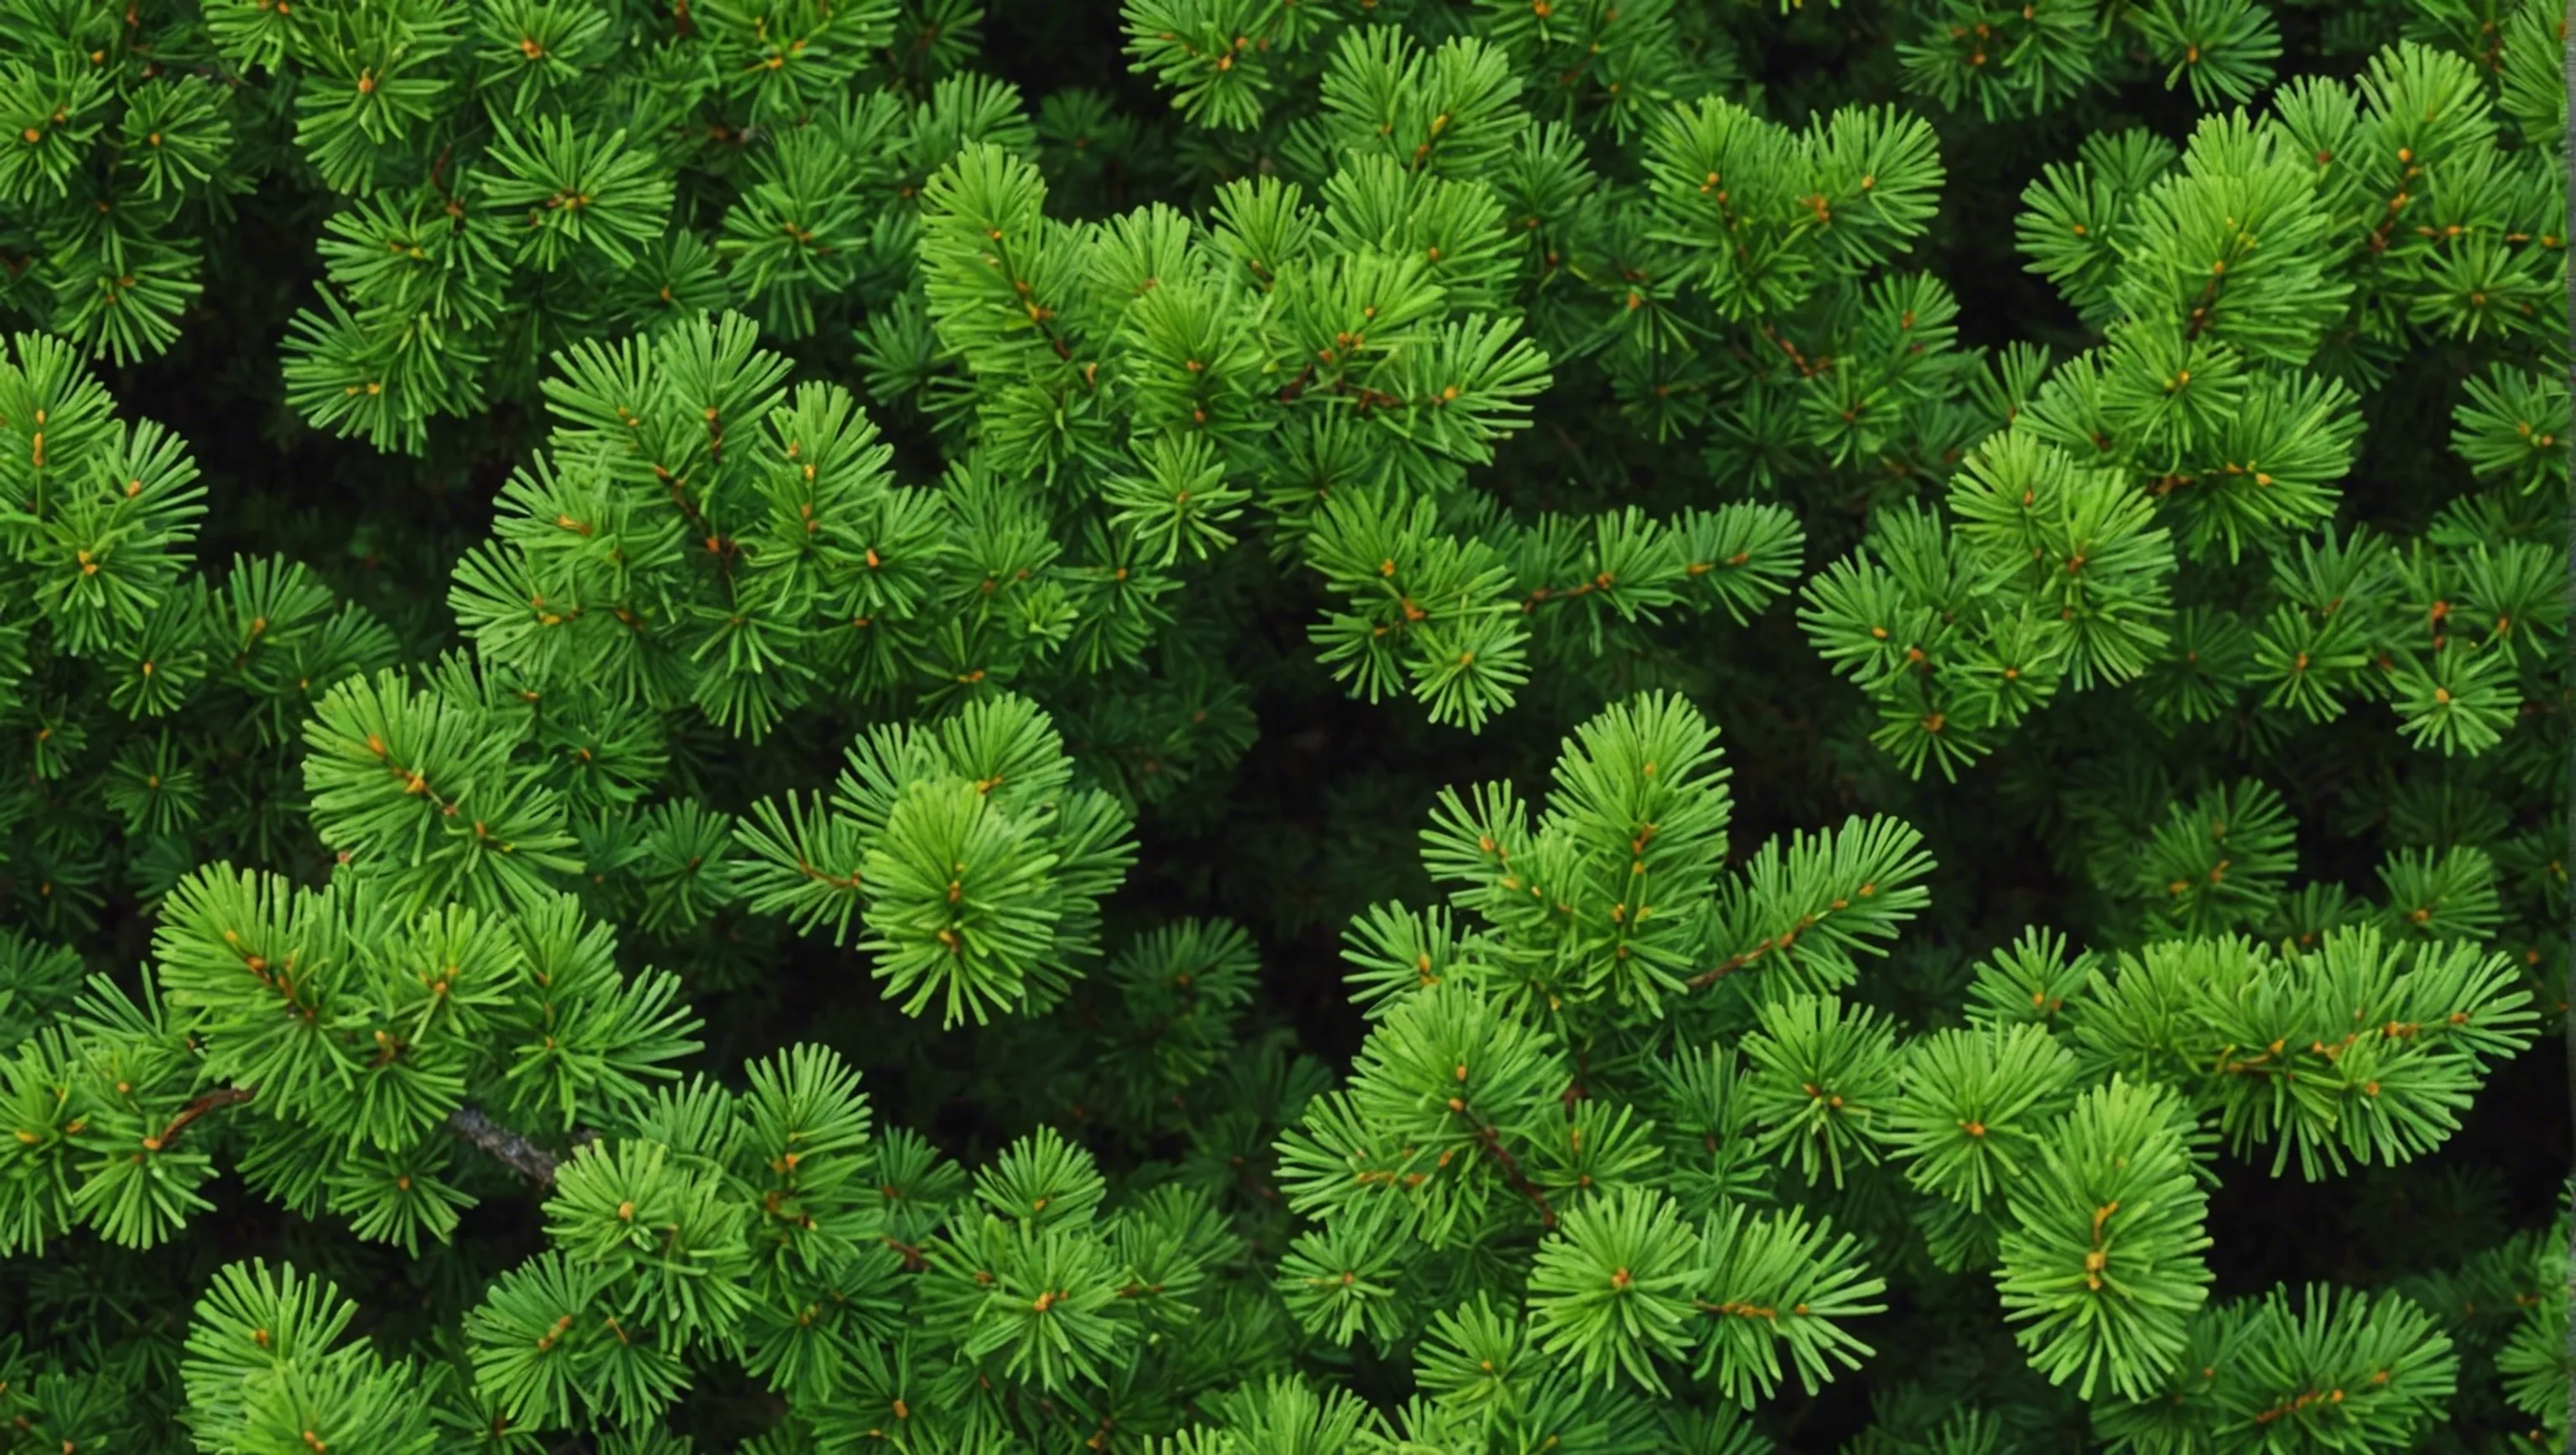 Creating Evergreen Content: A Guide for Marketing Professionals